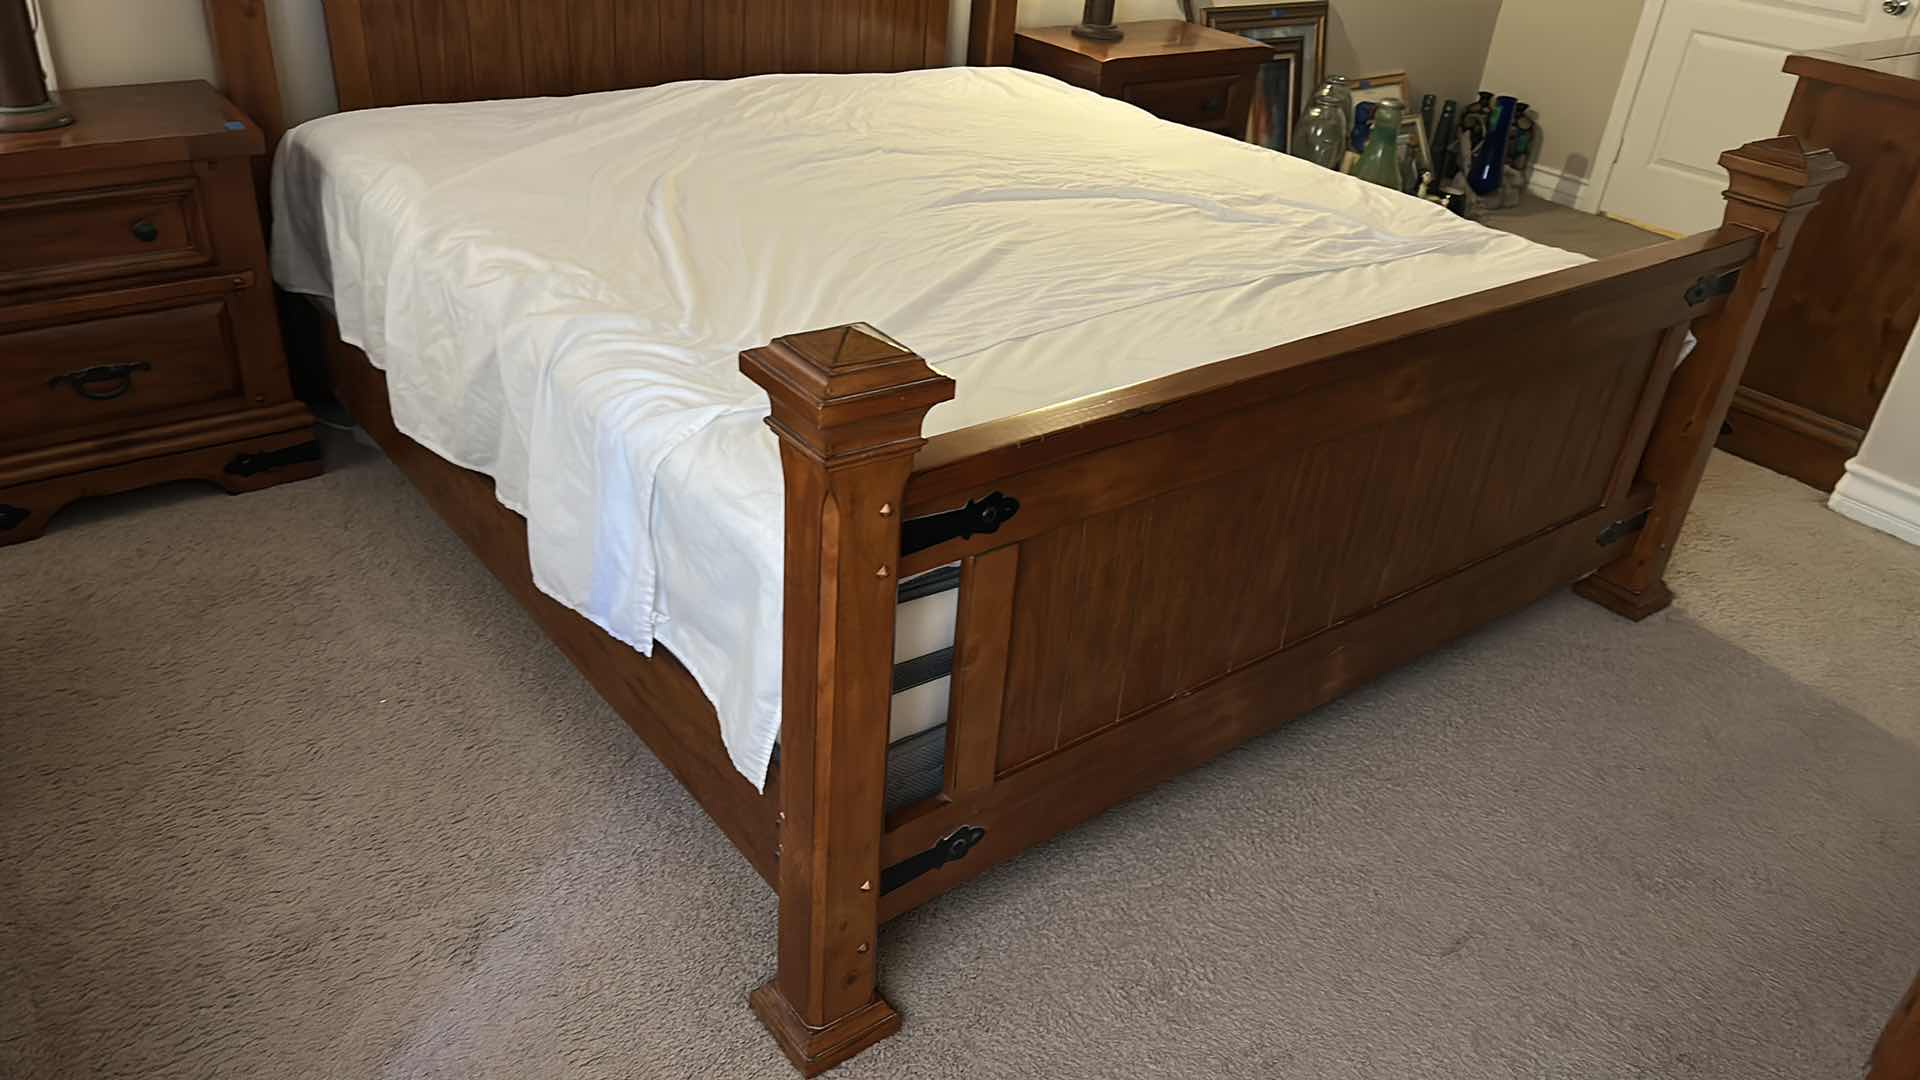 Photo 6 of HOME FURNITURE - WOOD WITH METAL ACCENTS - KING BEDFRAME HEADBOARD AND FOOTBOARD 82. 5” x 90” x H61” (MATTRESS AND OTHER PIECES SOLD SEPERATELY)